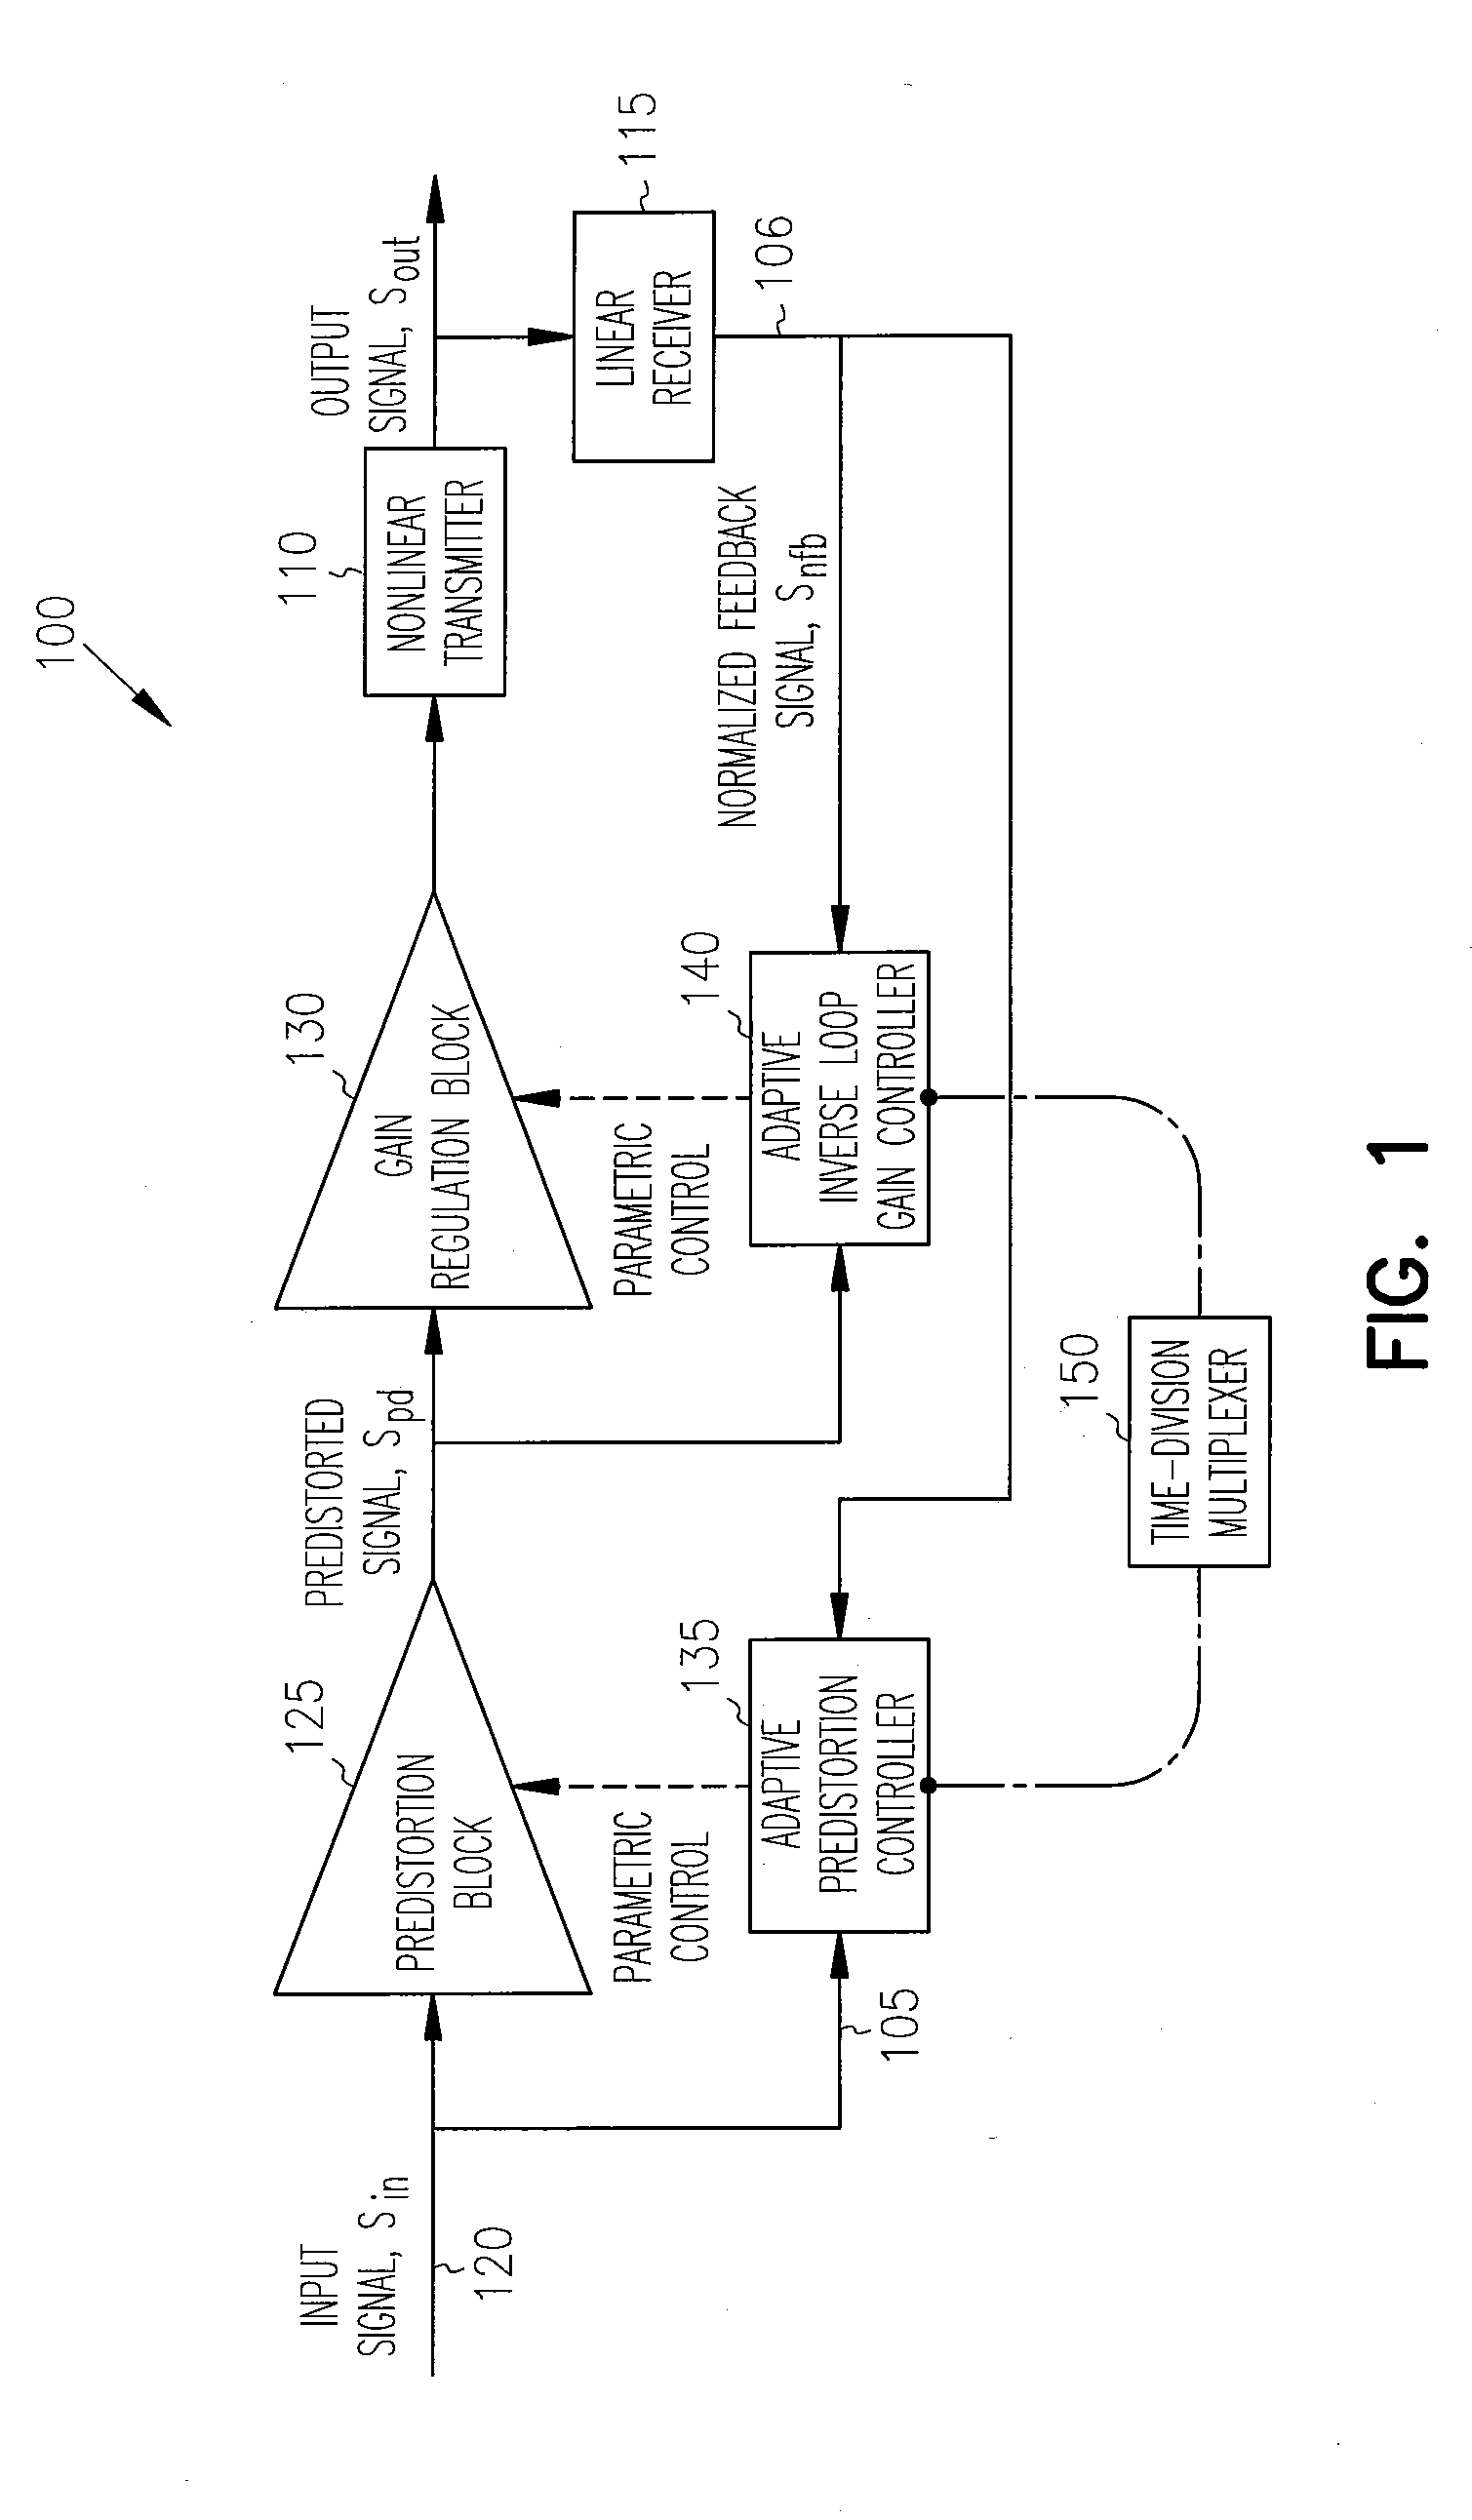 Adaptive controller for linearization of transmitter with impairments